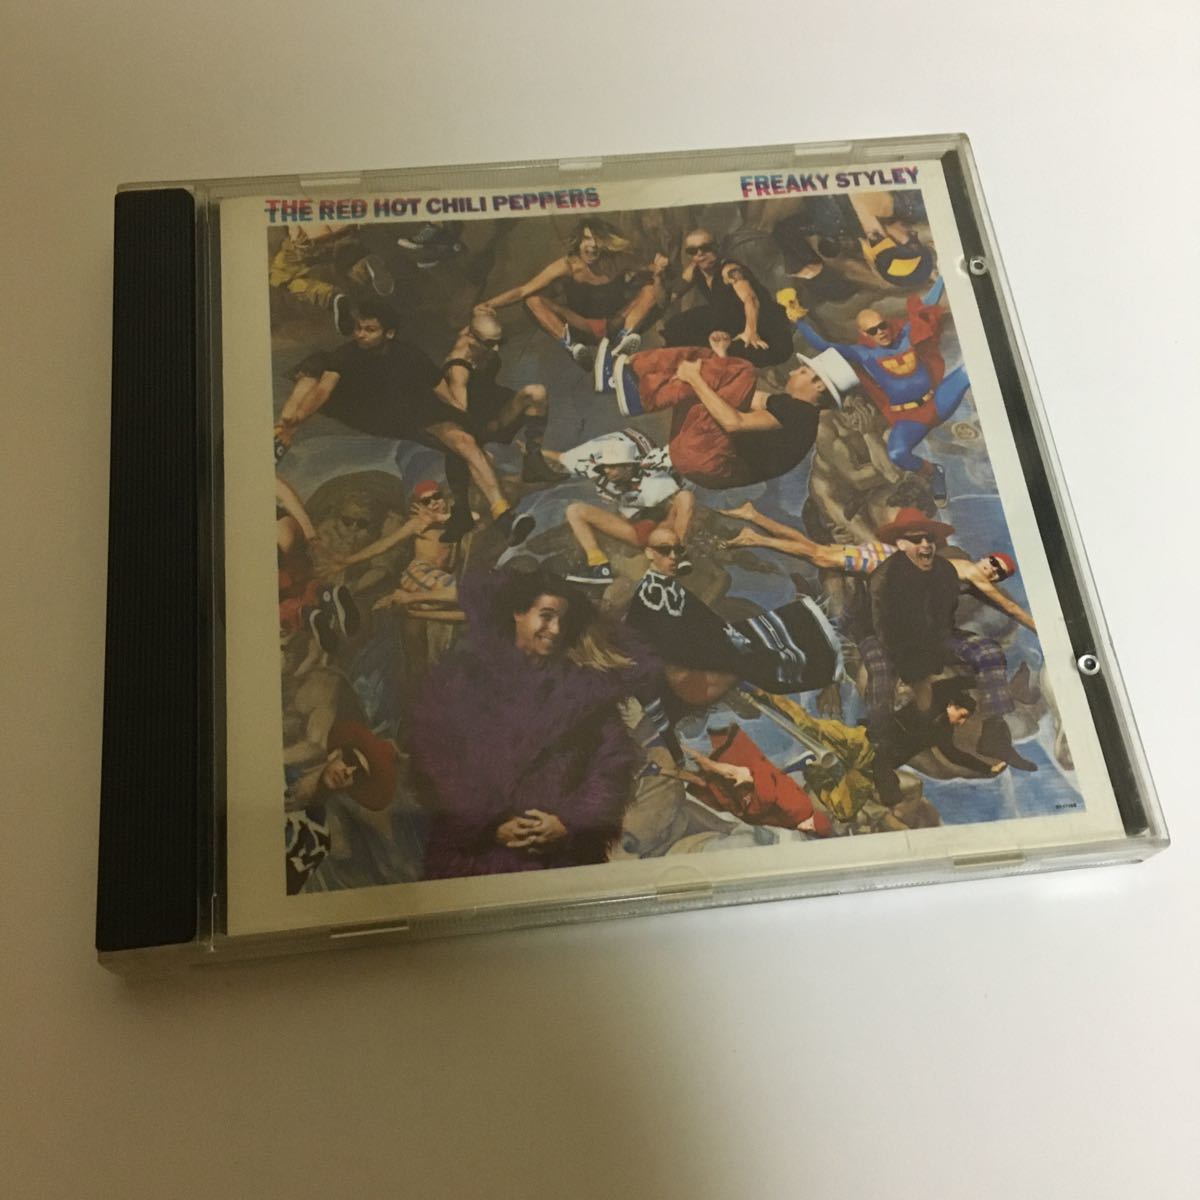 THE RED HOT CHILI PEPPERS レッド・ホット・チリ・ペッパーズ 2ndアルバム『FREAKY STYLEY』UK盤CD 管理番号 RHC-20201009_画像1